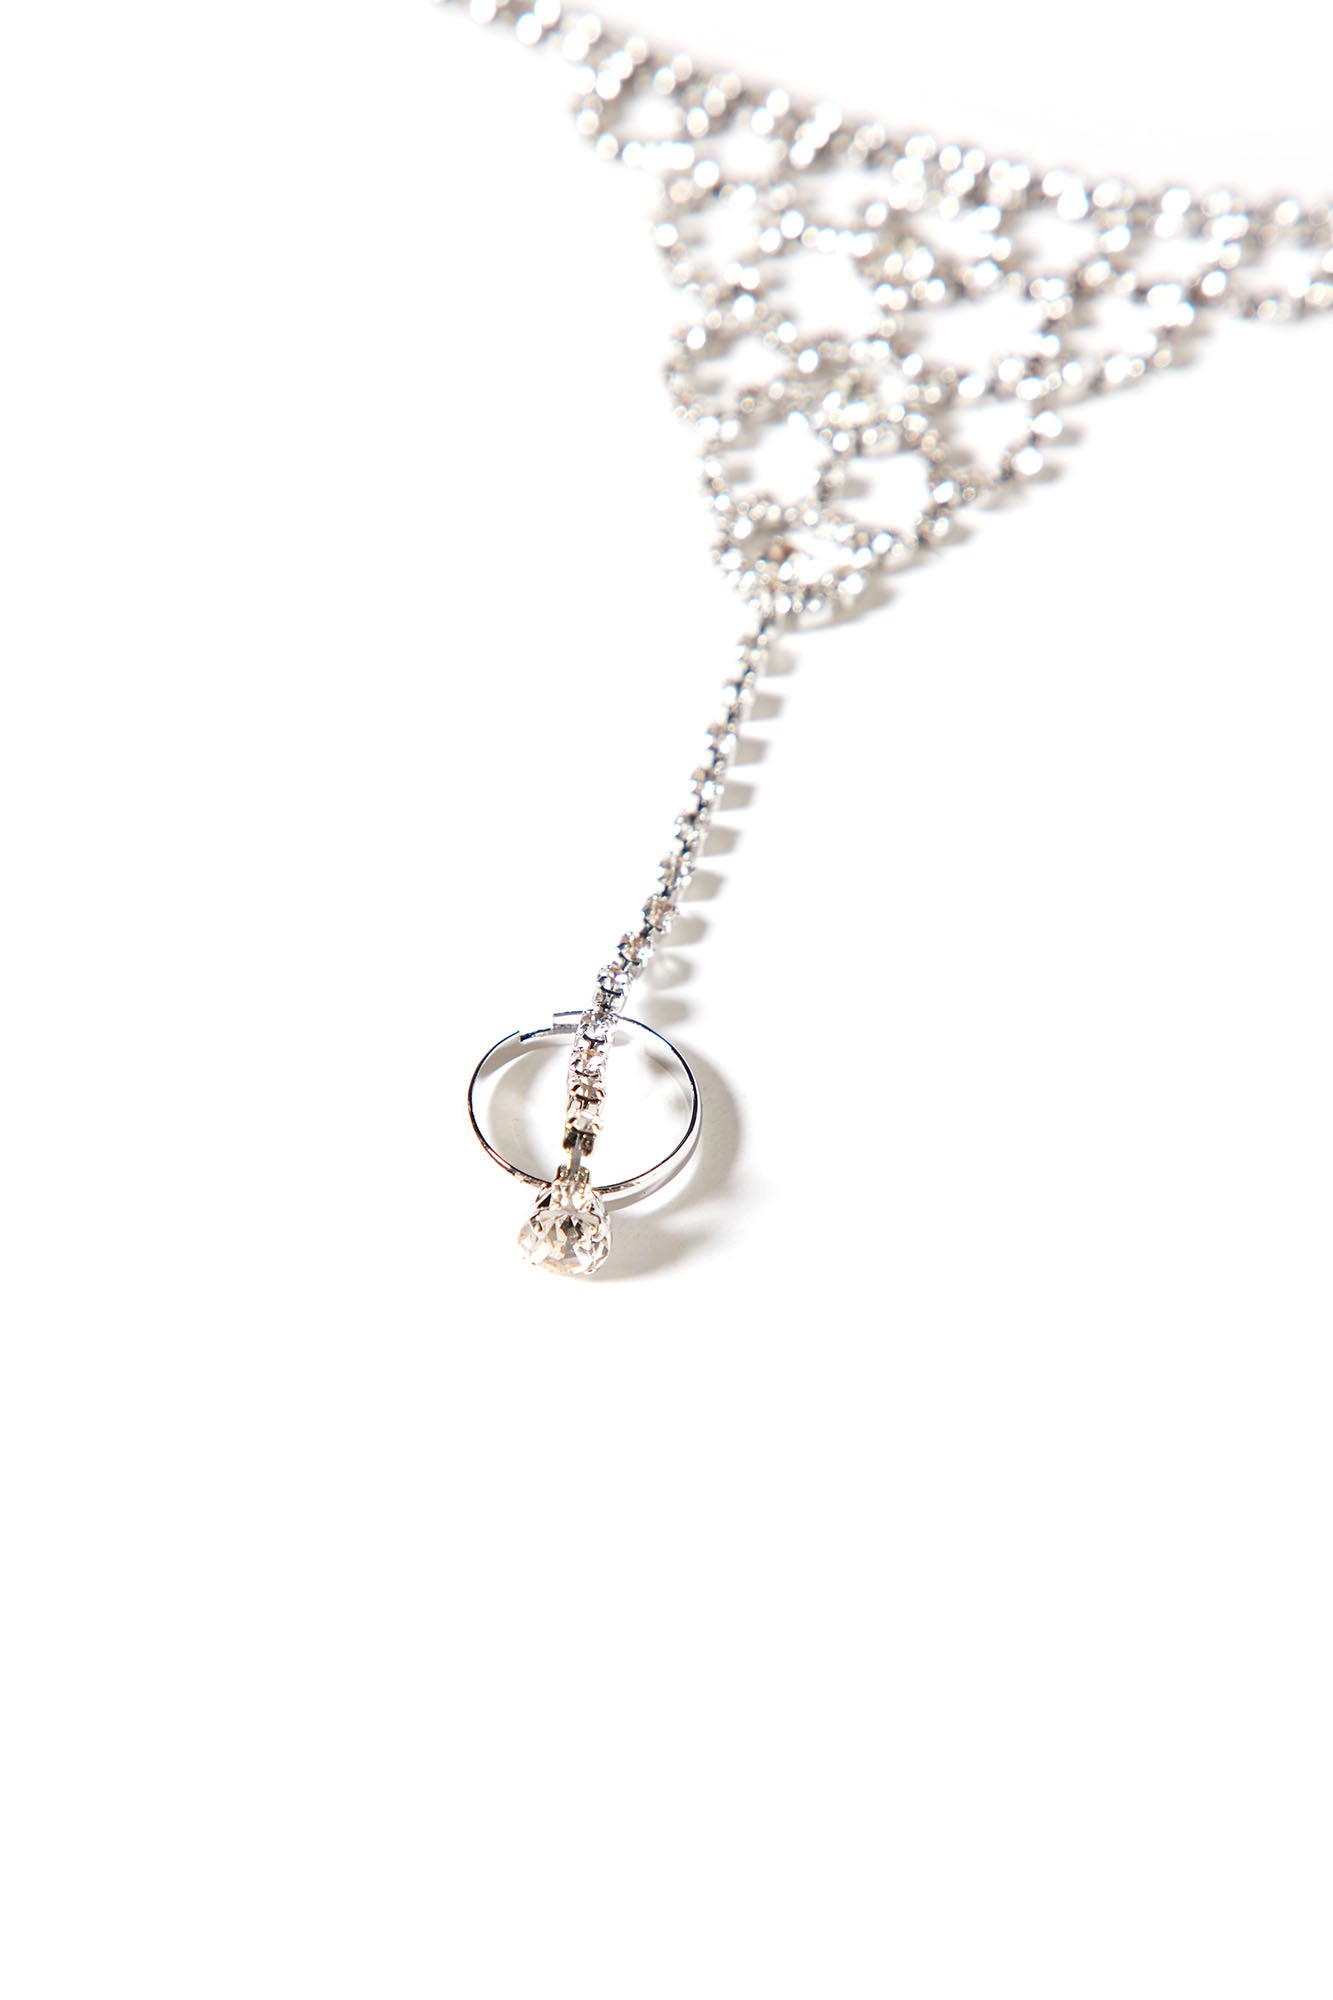 Dance With Me Hand Chain - Silver